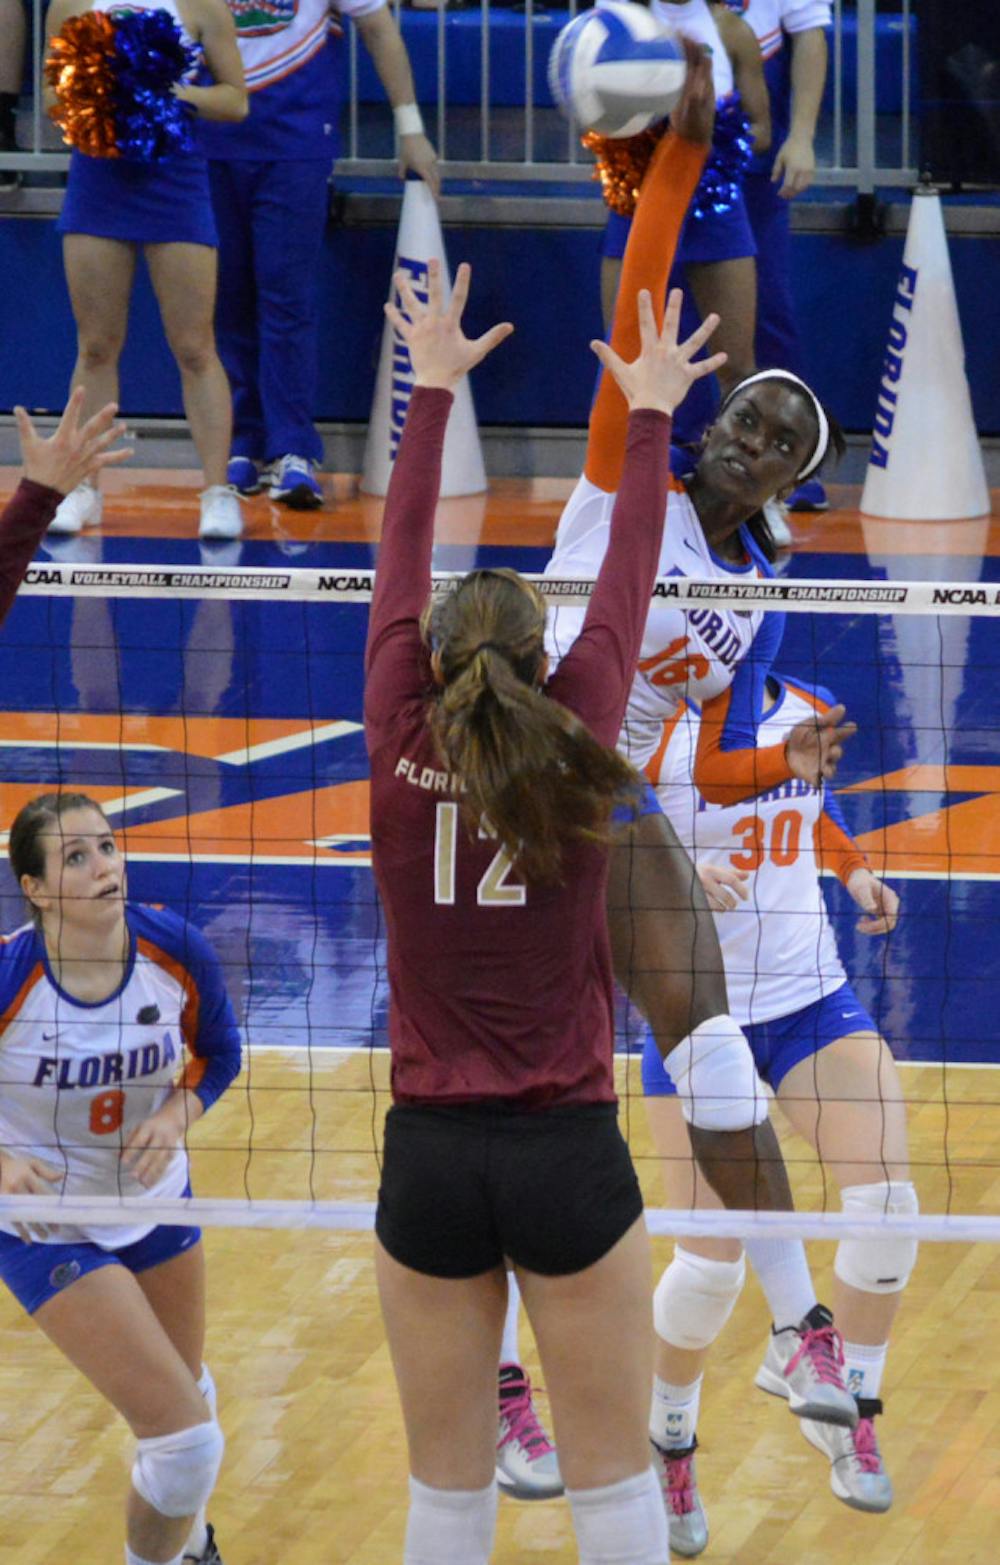 <p class="p1">Simone Antwi swings at the ball during Florida's 3-2 loss to Florida State in the second round of the NCAA Tournament on Dec. 6 in the O'Connell Center.</p>